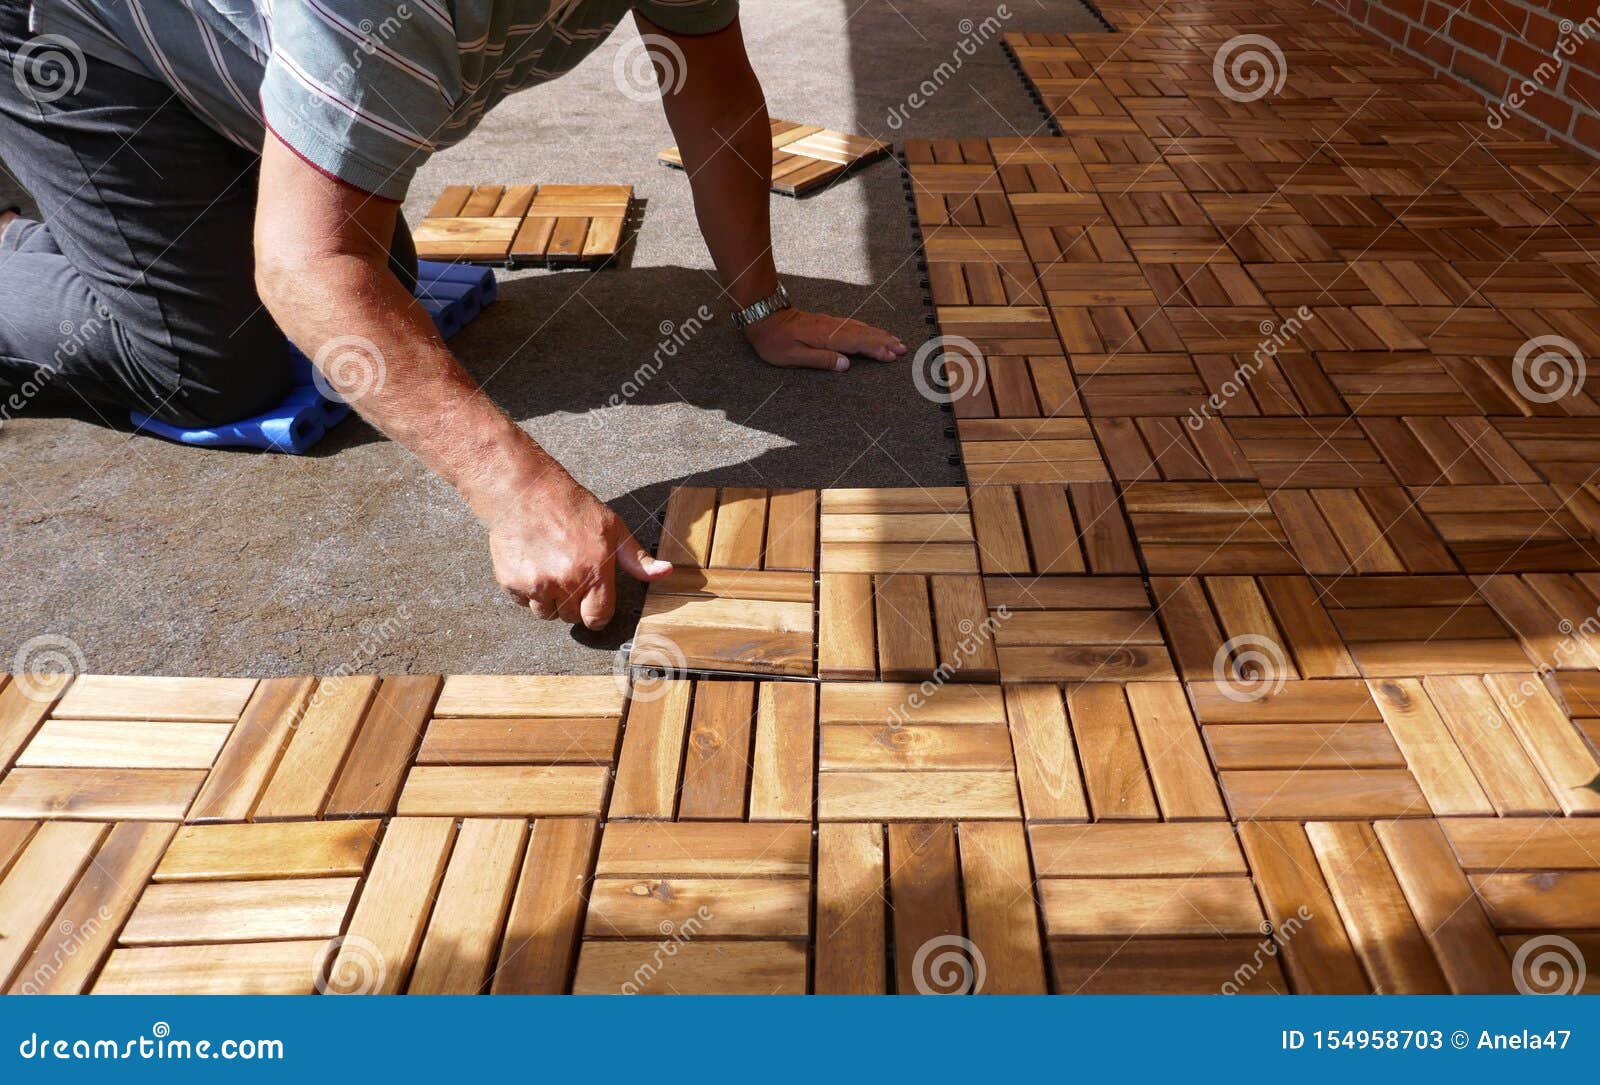 Lay Wooden Tiles On A Terrace. Square Wood Panels Are Connected With Lock Clic Stock Image